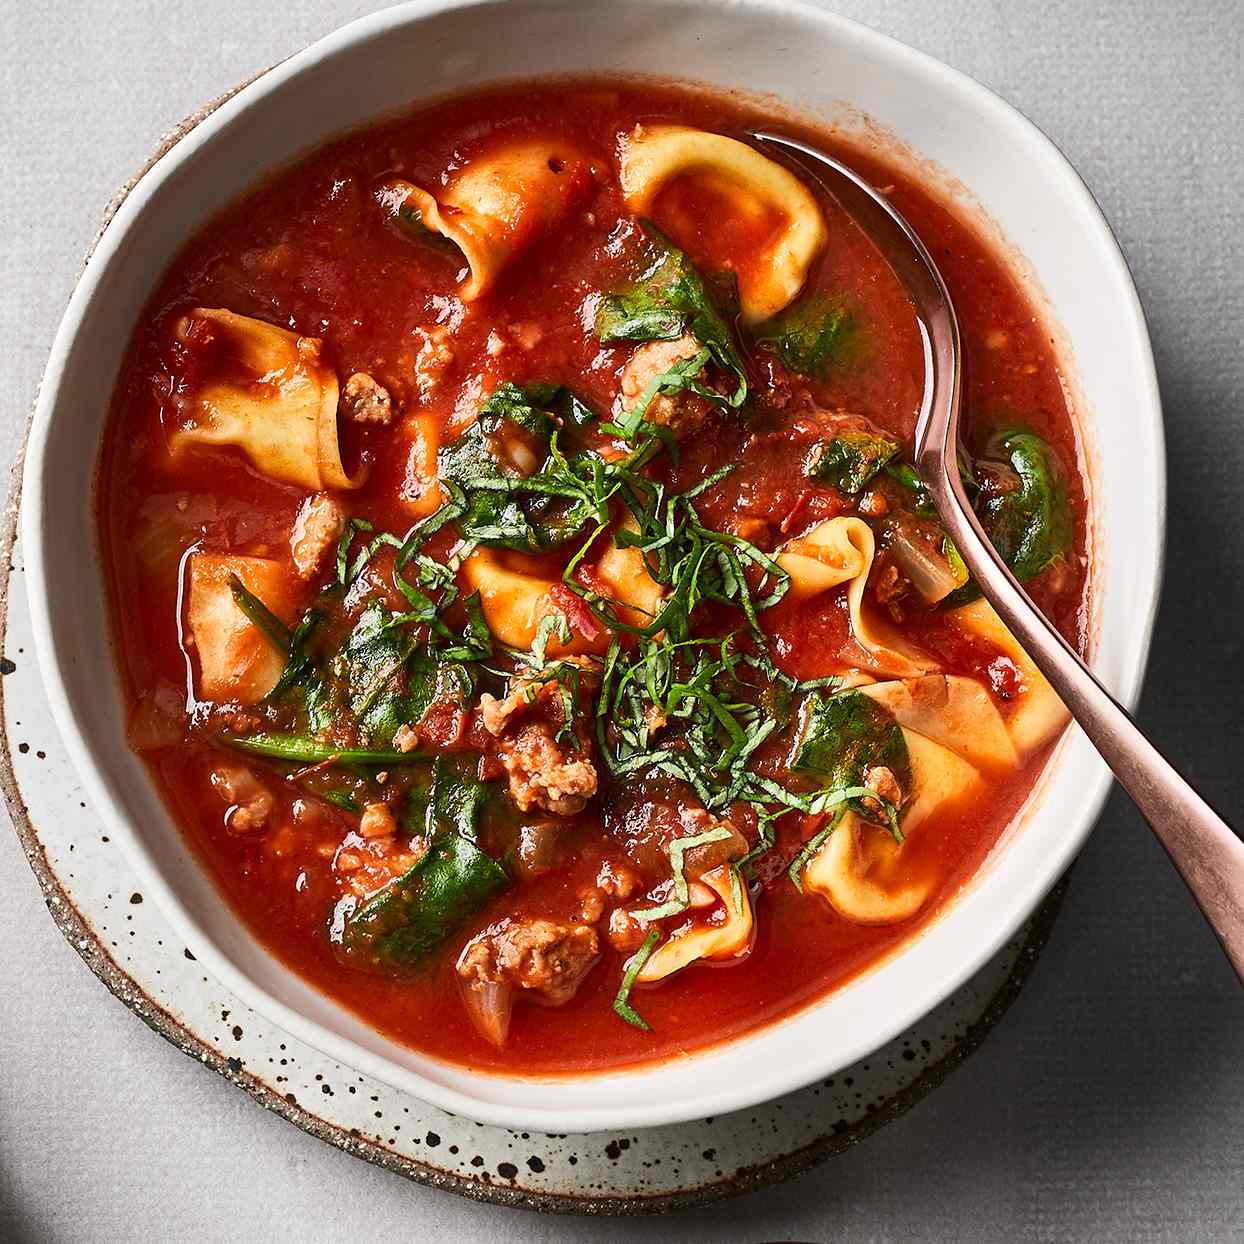 Sausage, Spinach & Tortellini Soup